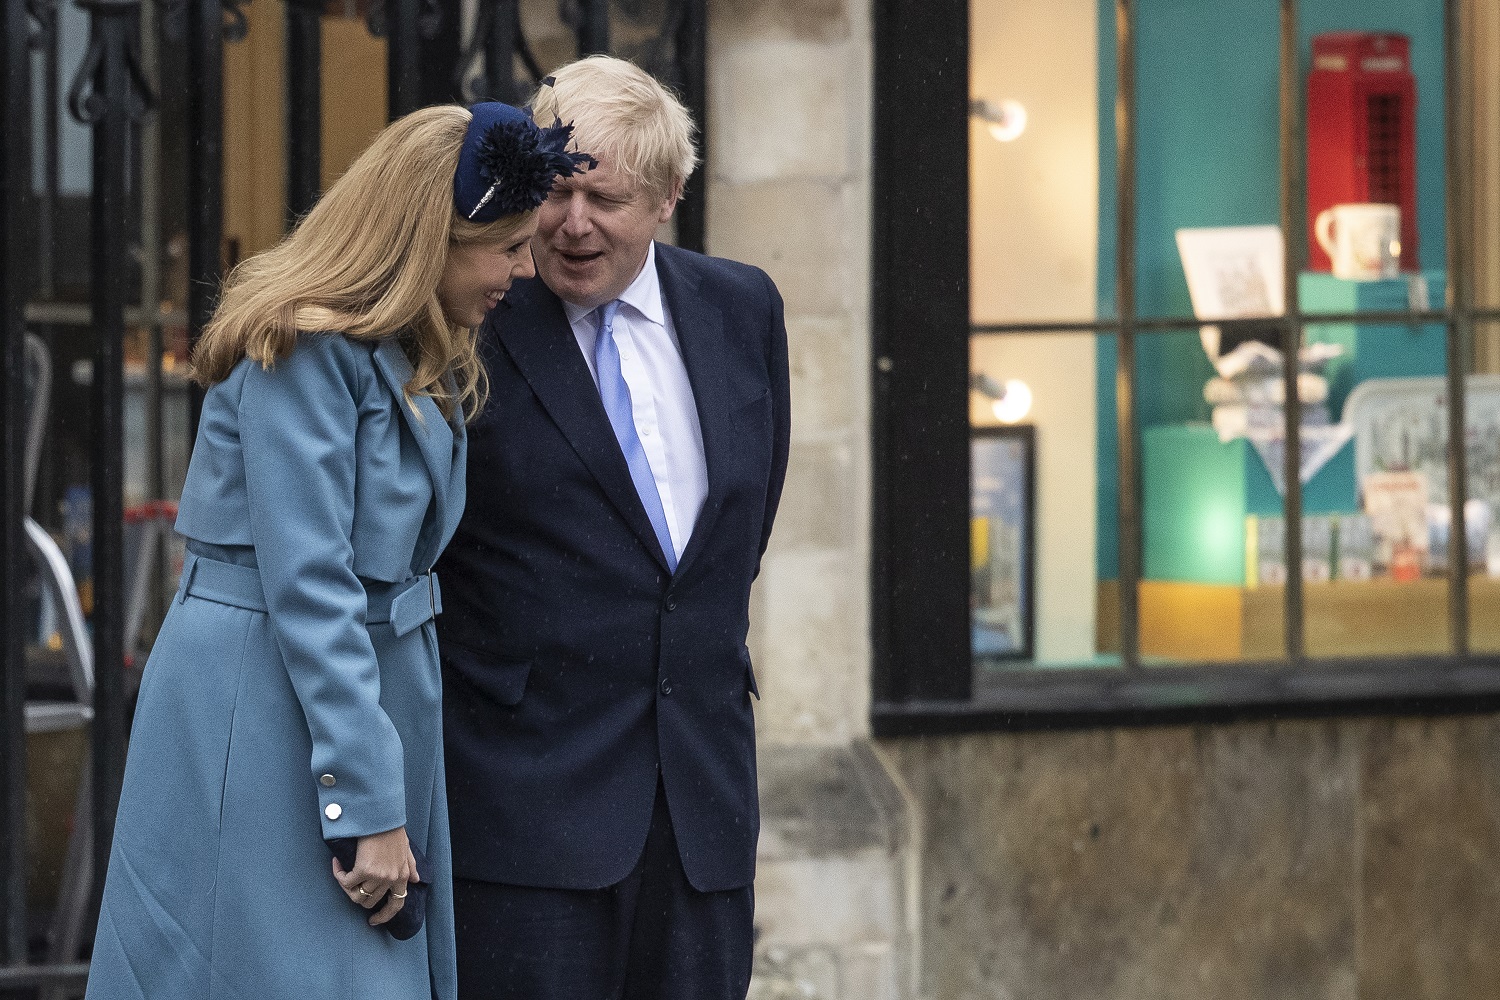 LONDON, ENGLAND - MARCH 09: Prime Minister Boris Johnson and Carrie Symonds leave after attending the annual Commonwealth Day Service at Westminster Abbey on March 9, 2020 in London, England. (Photo by Dan Kitwood/Getty Images)